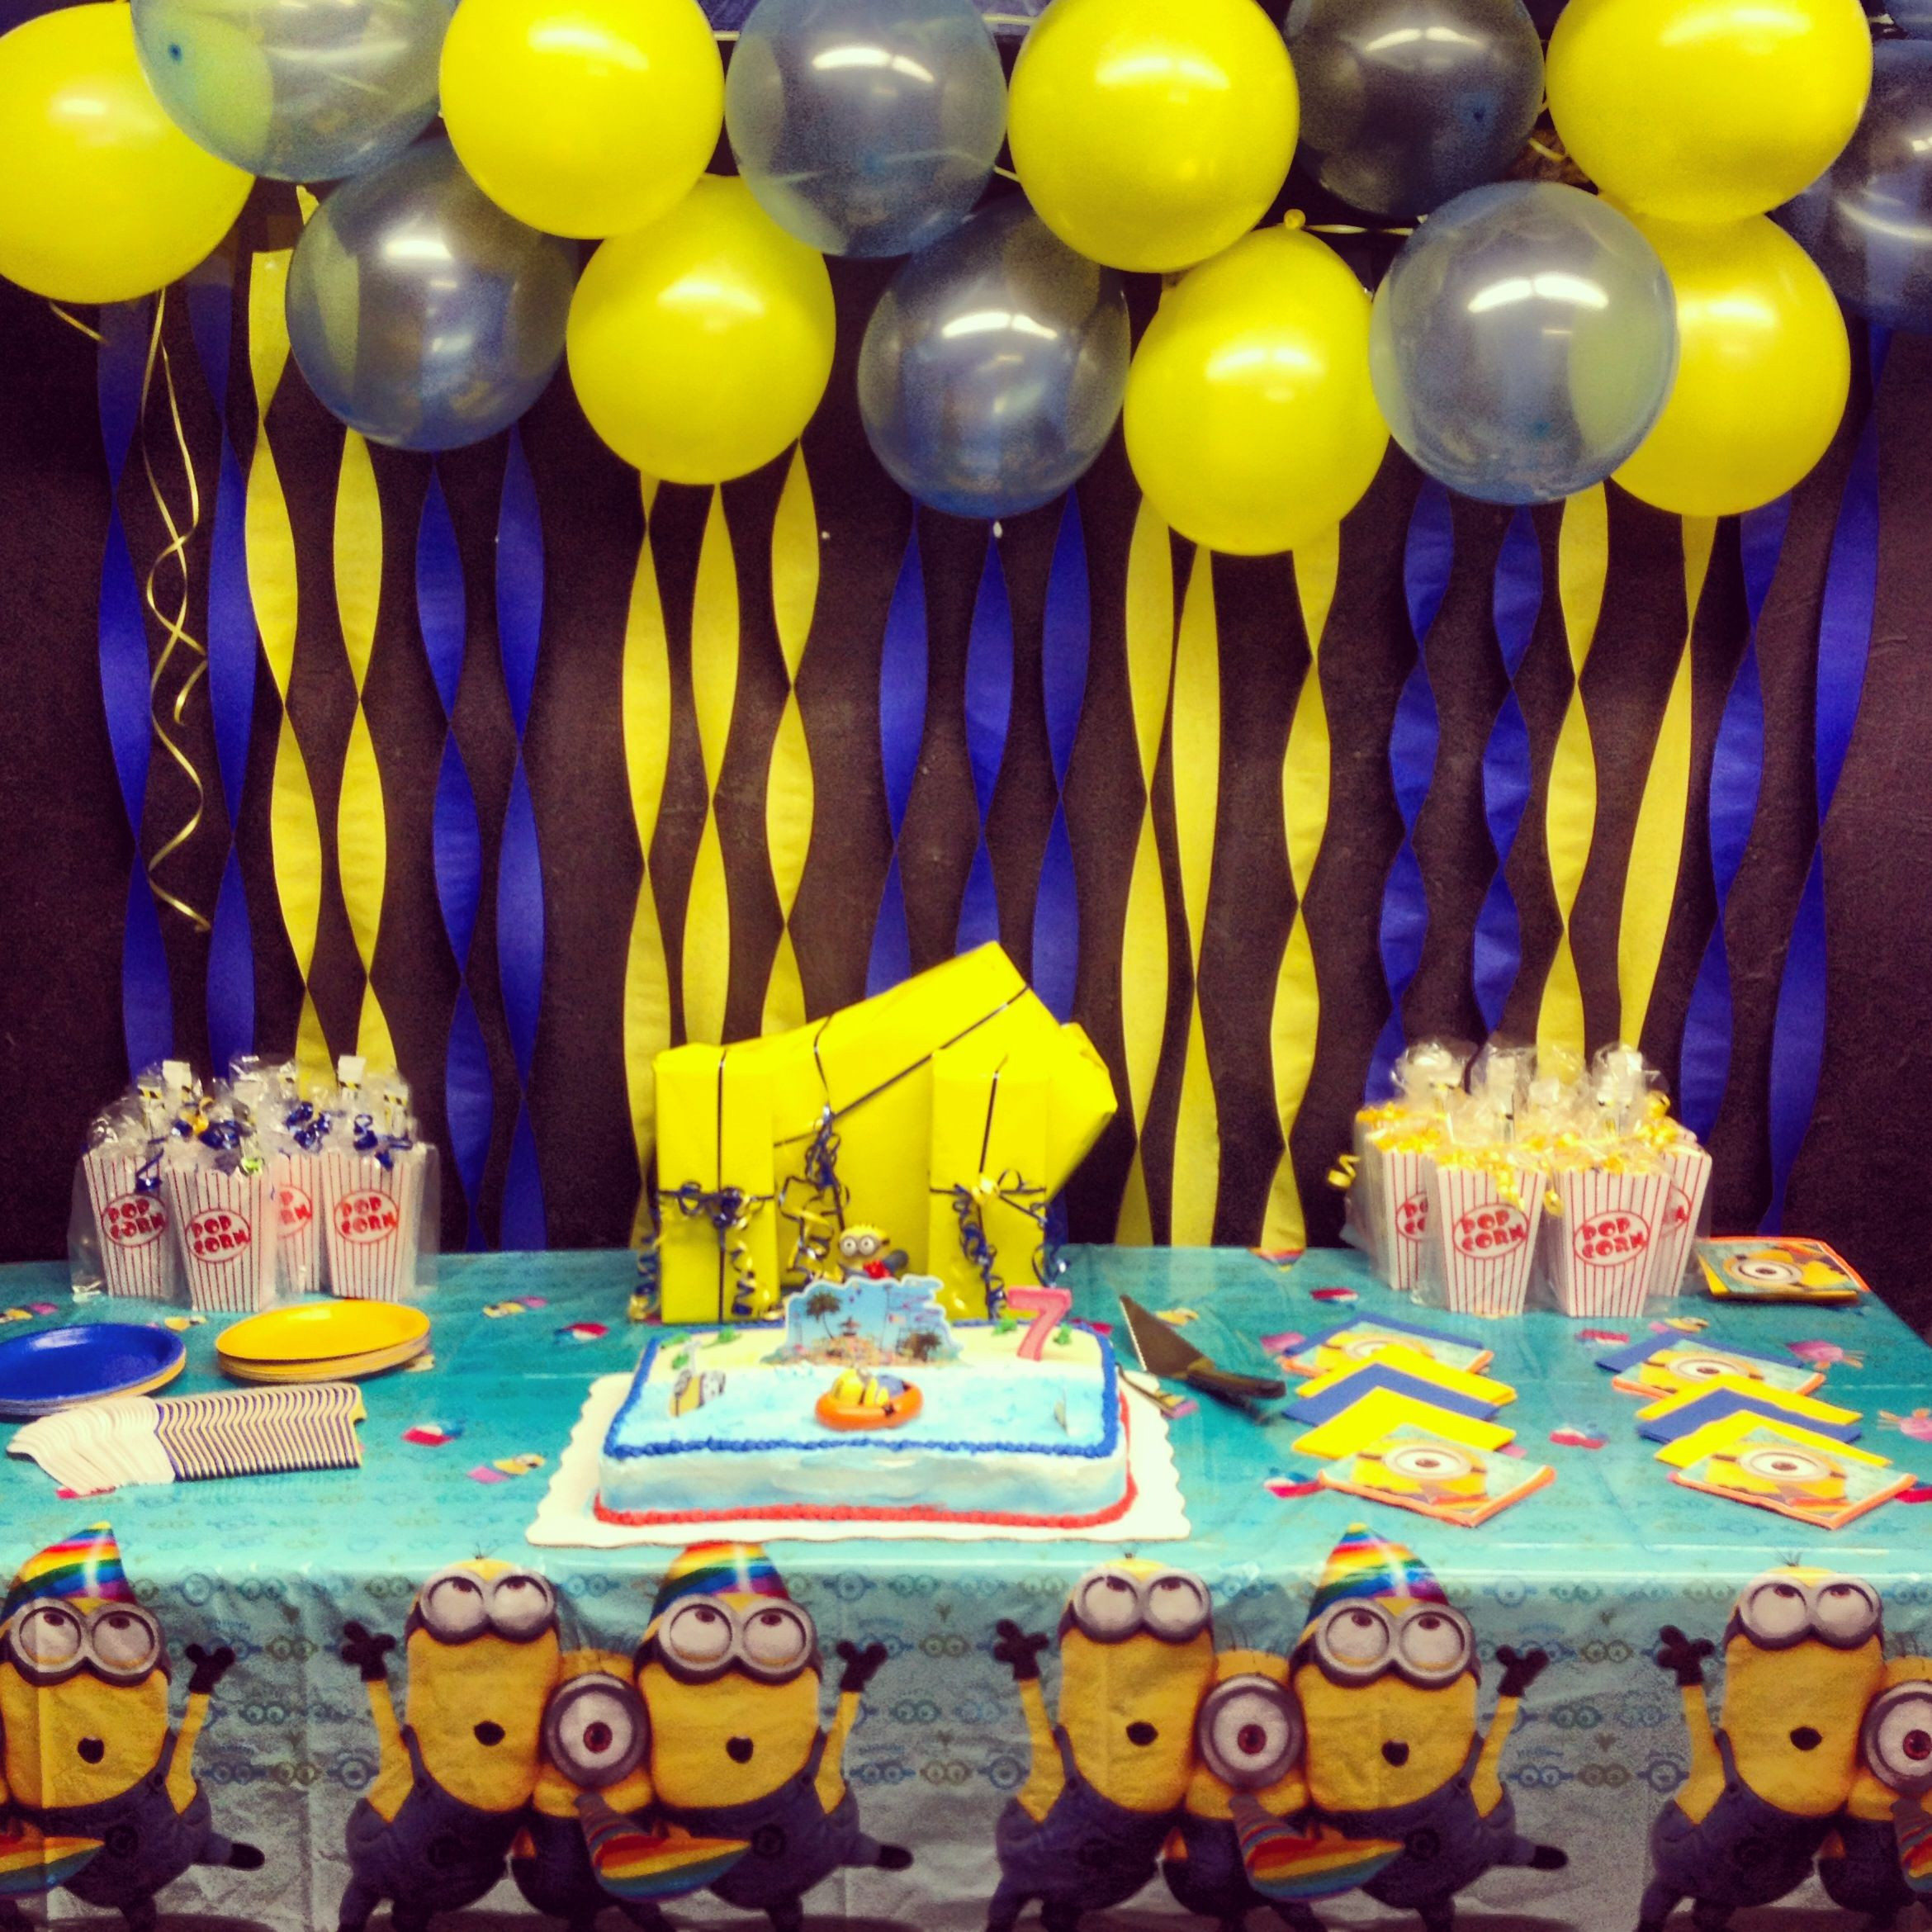 Minions Birthday Party Decorations
 Minion party on Pinterest